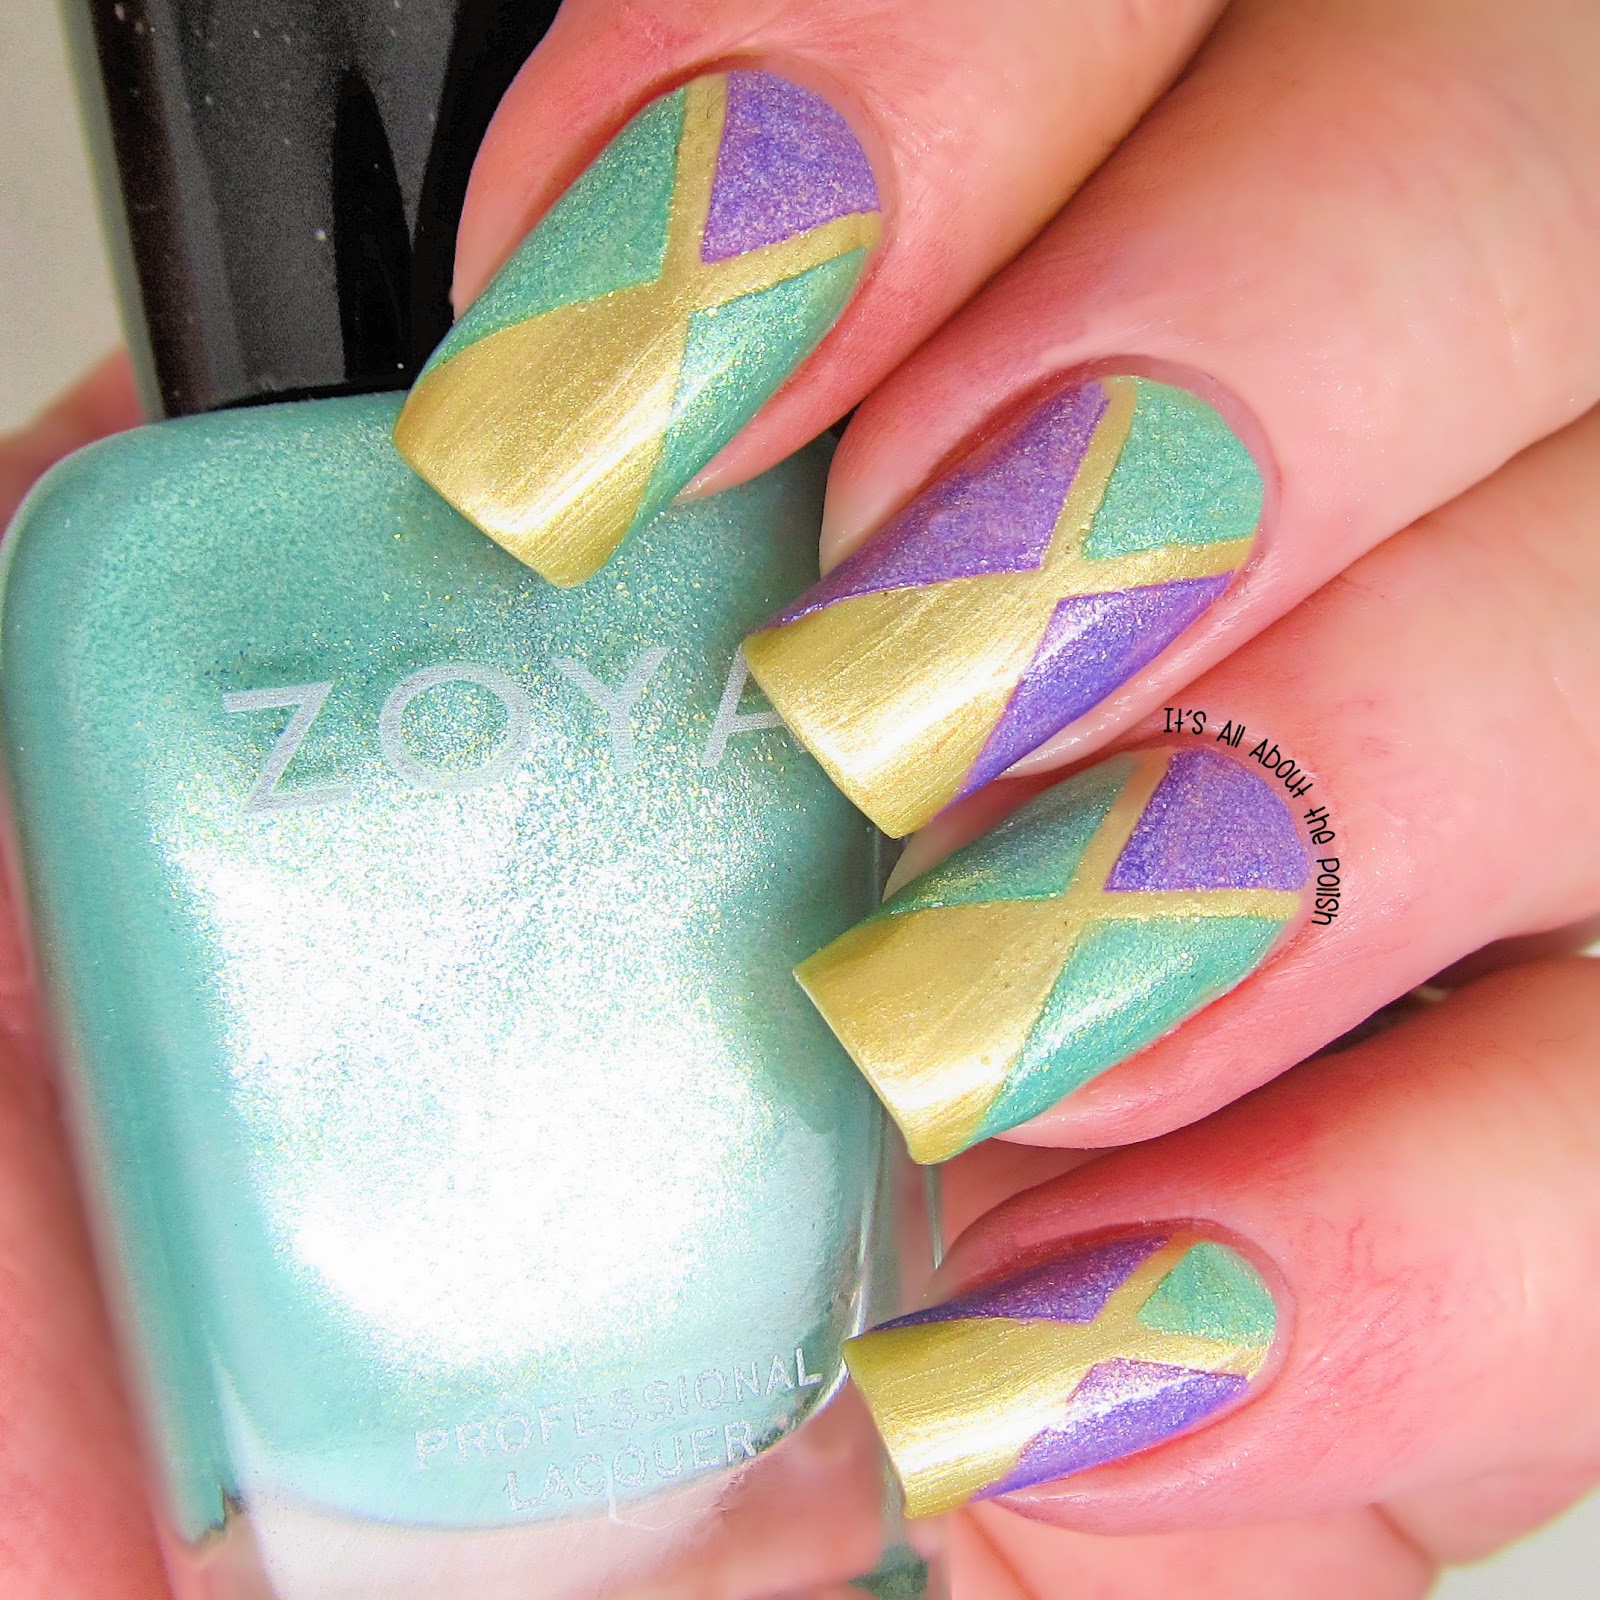 It's all about the polish: Zoya Brooklyn, Hudson and Dillon taped design